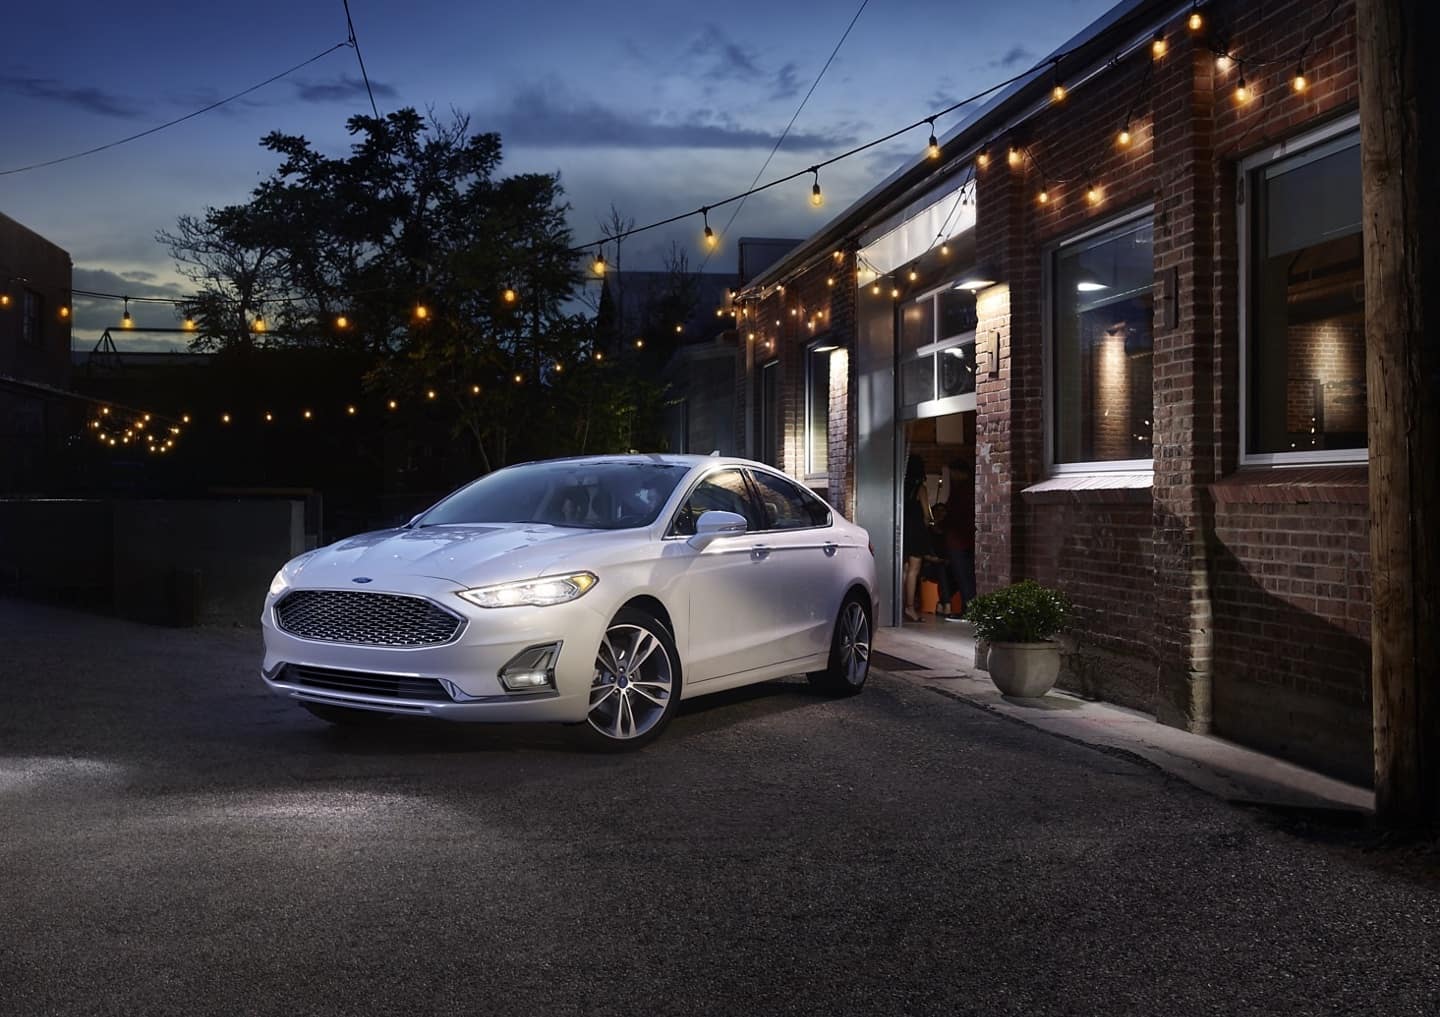 Used Ford Fusion Titanium in white in front of a red brick building with patio string lights above.